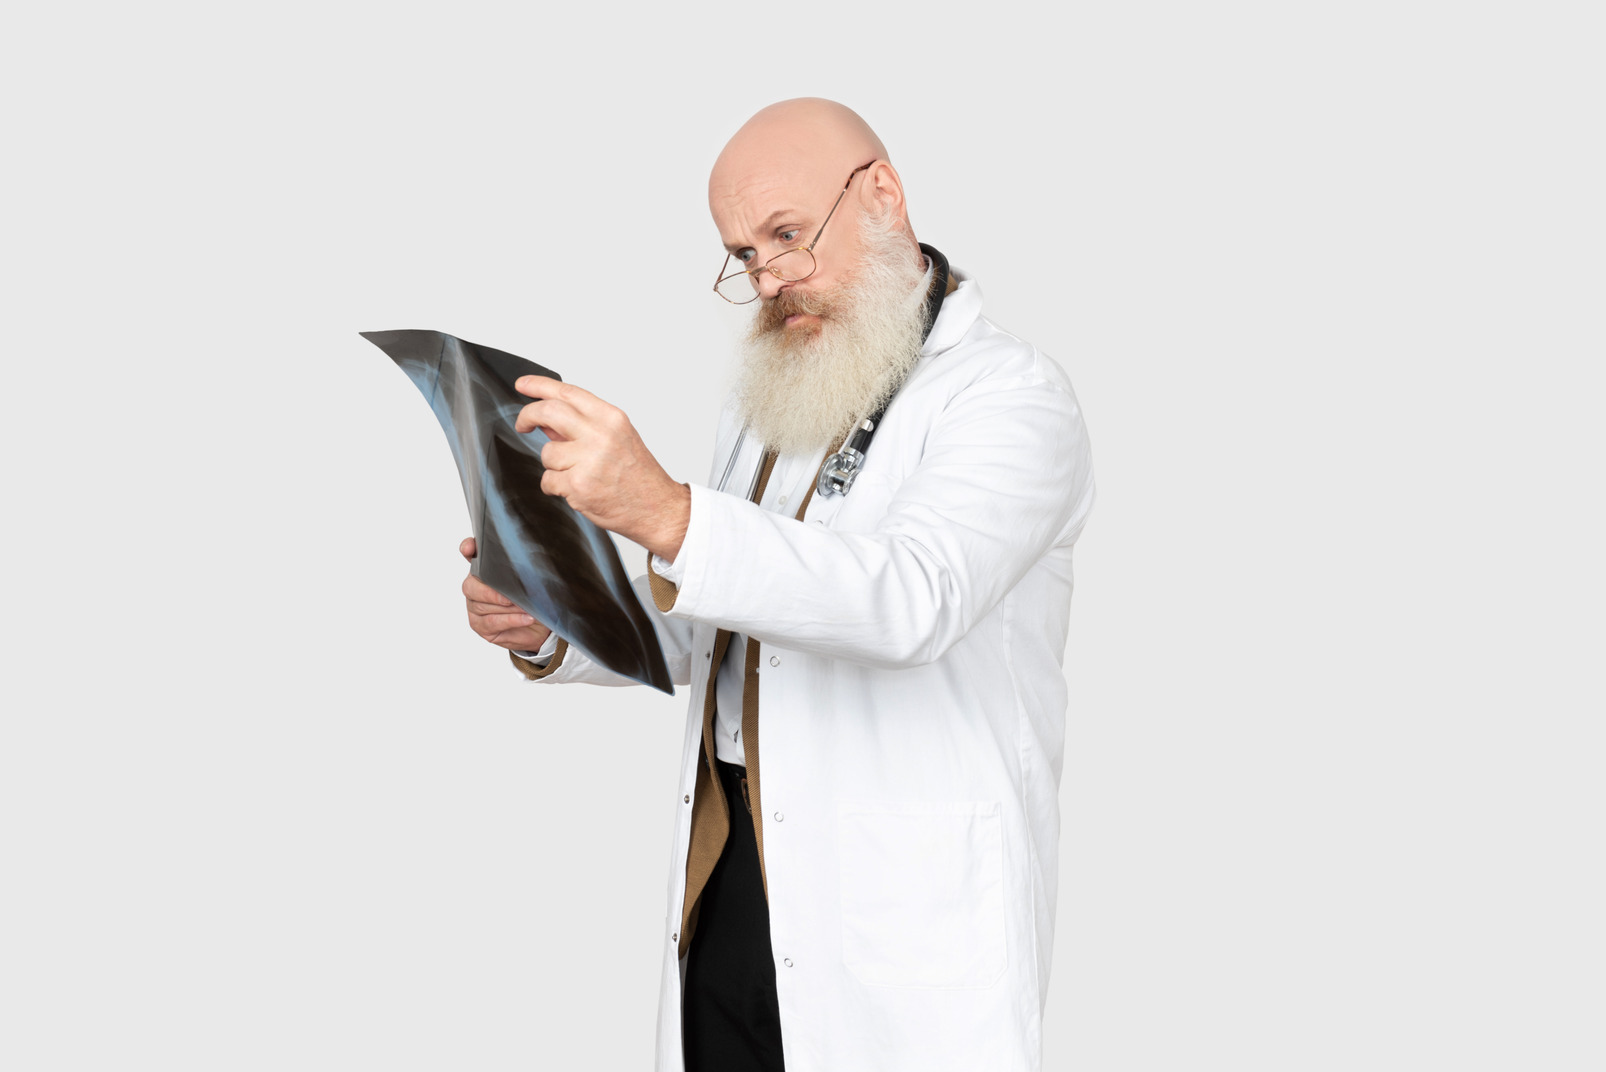 Mature doctor holding an x-ray